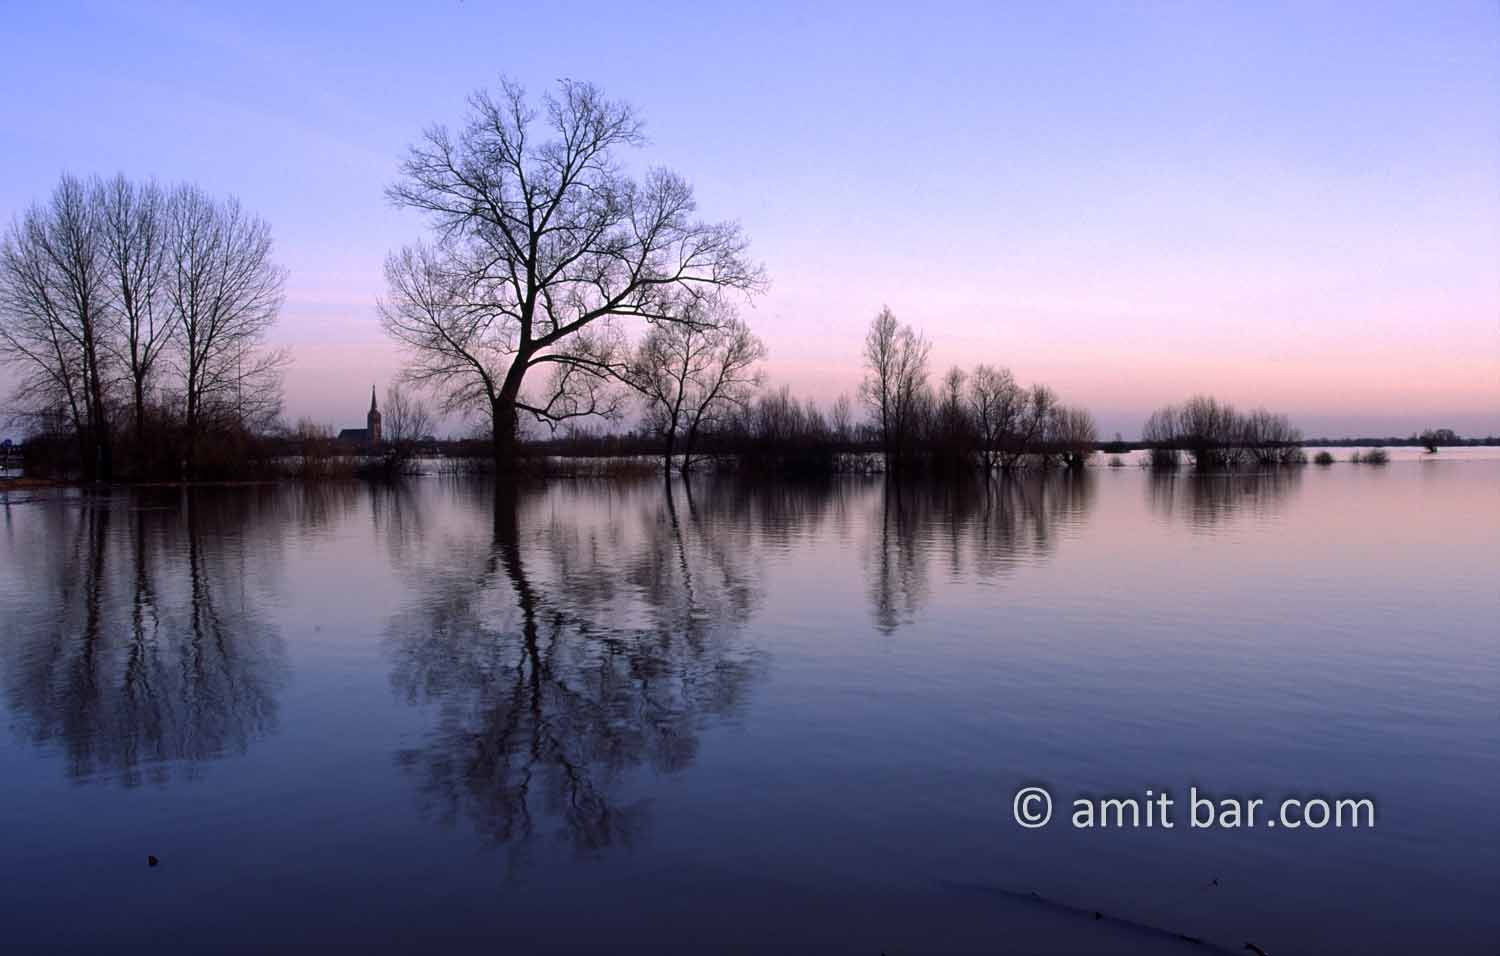 Flood in Doesburg II: Reflections of trees at Doesburg